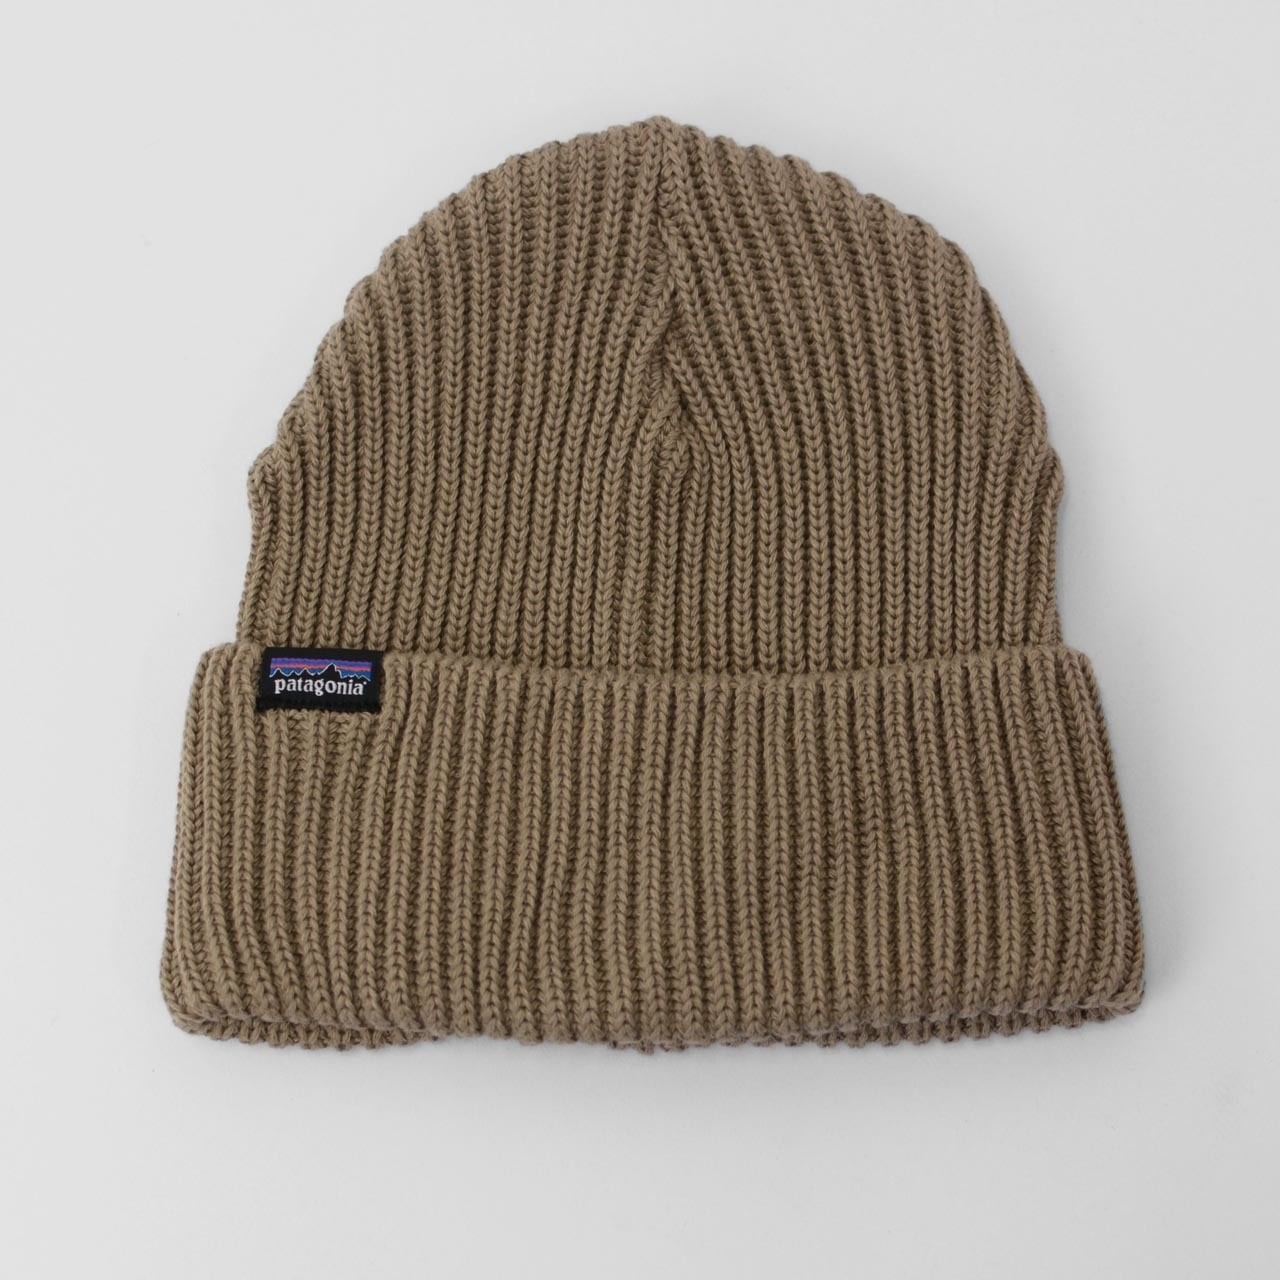 Patagonia [パタゴニア] Fishermans Rolled Beanie [29105-23